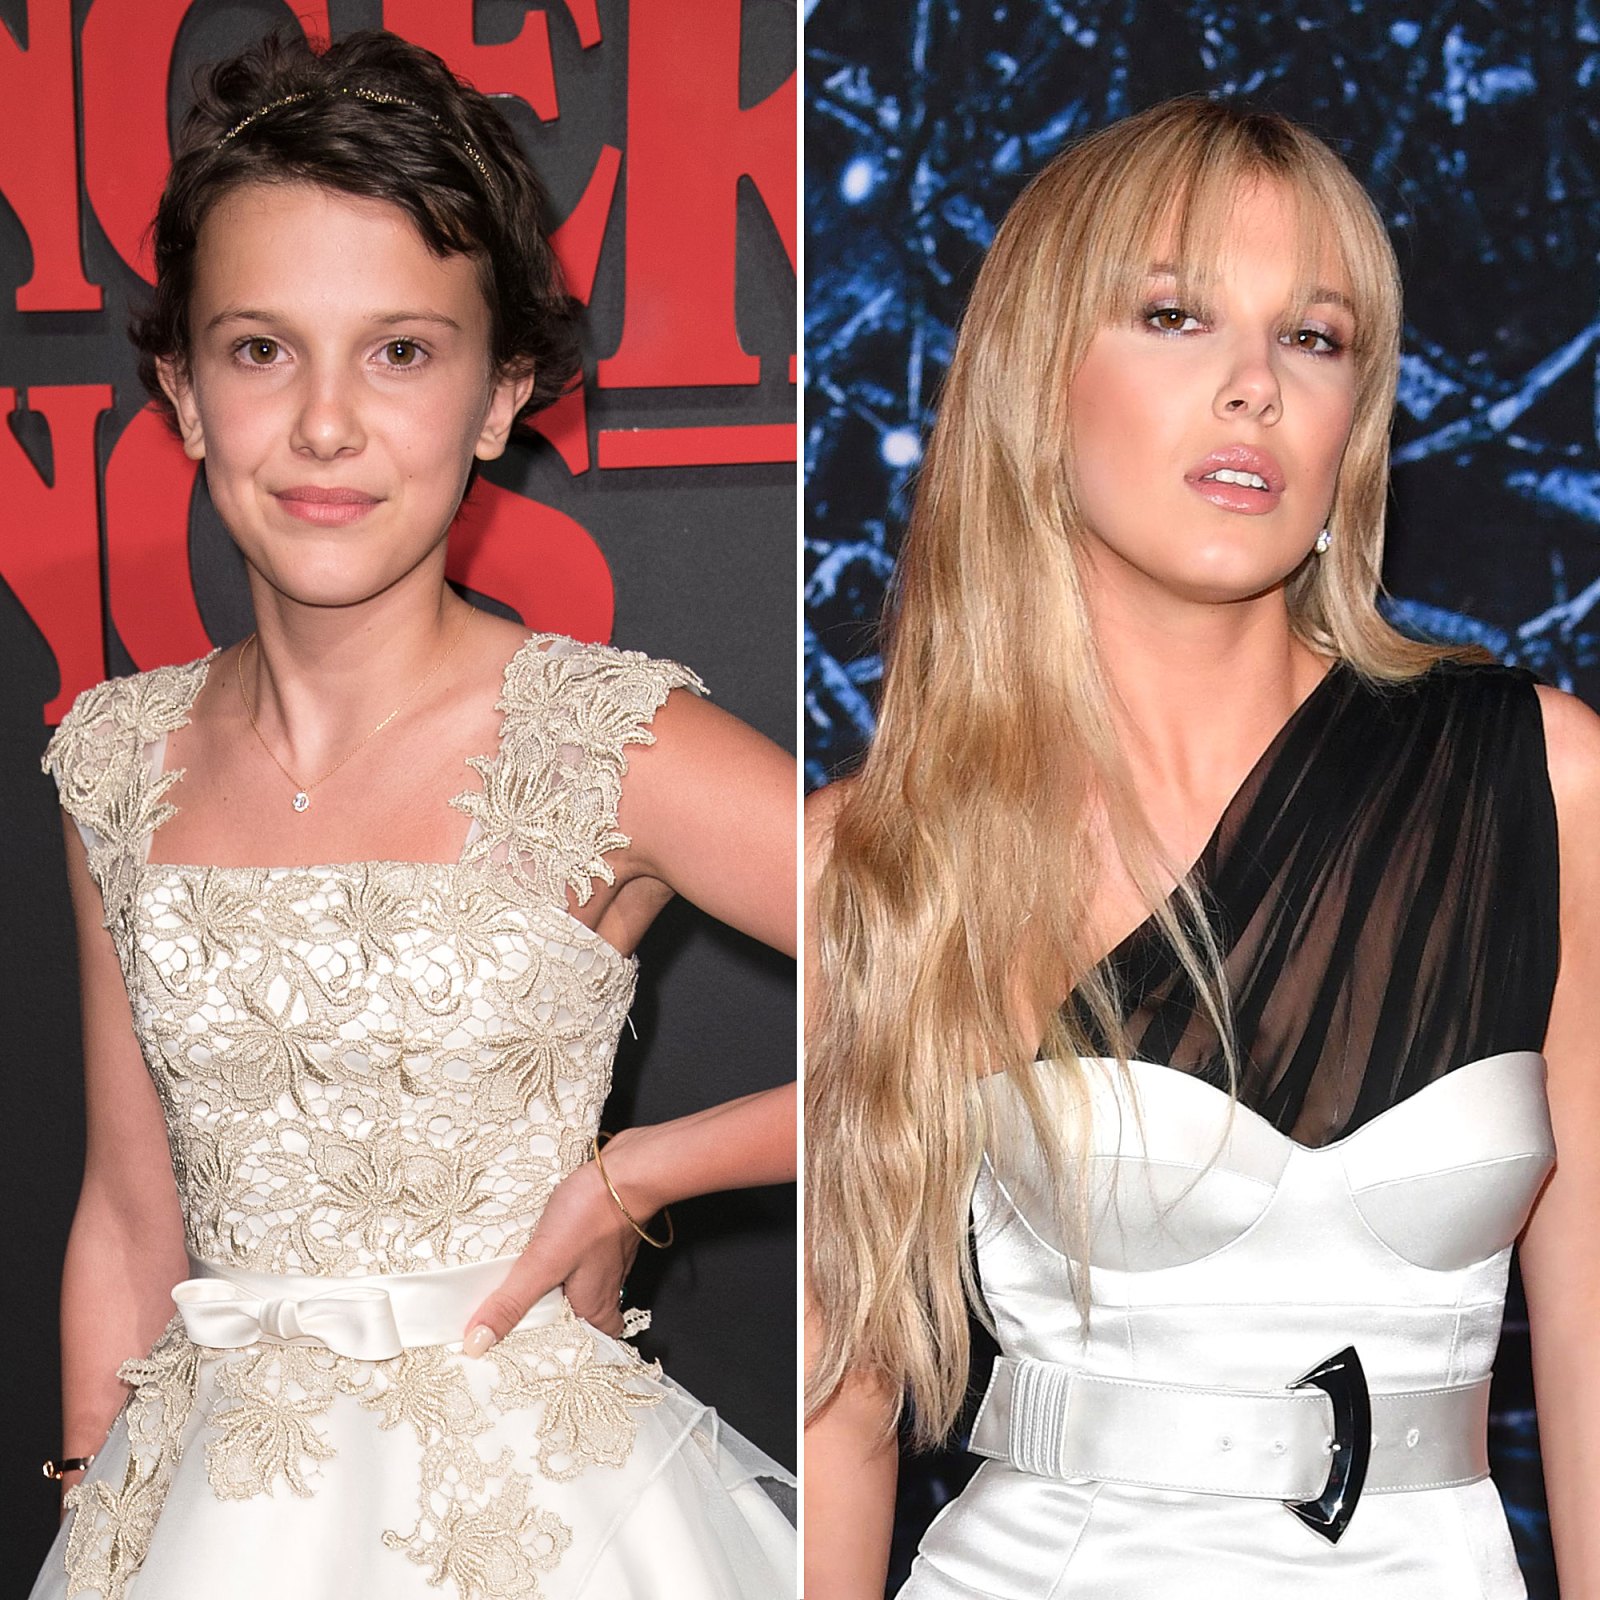 Millie Bobby Brown Stranger Things Cast From Season 1 to Now